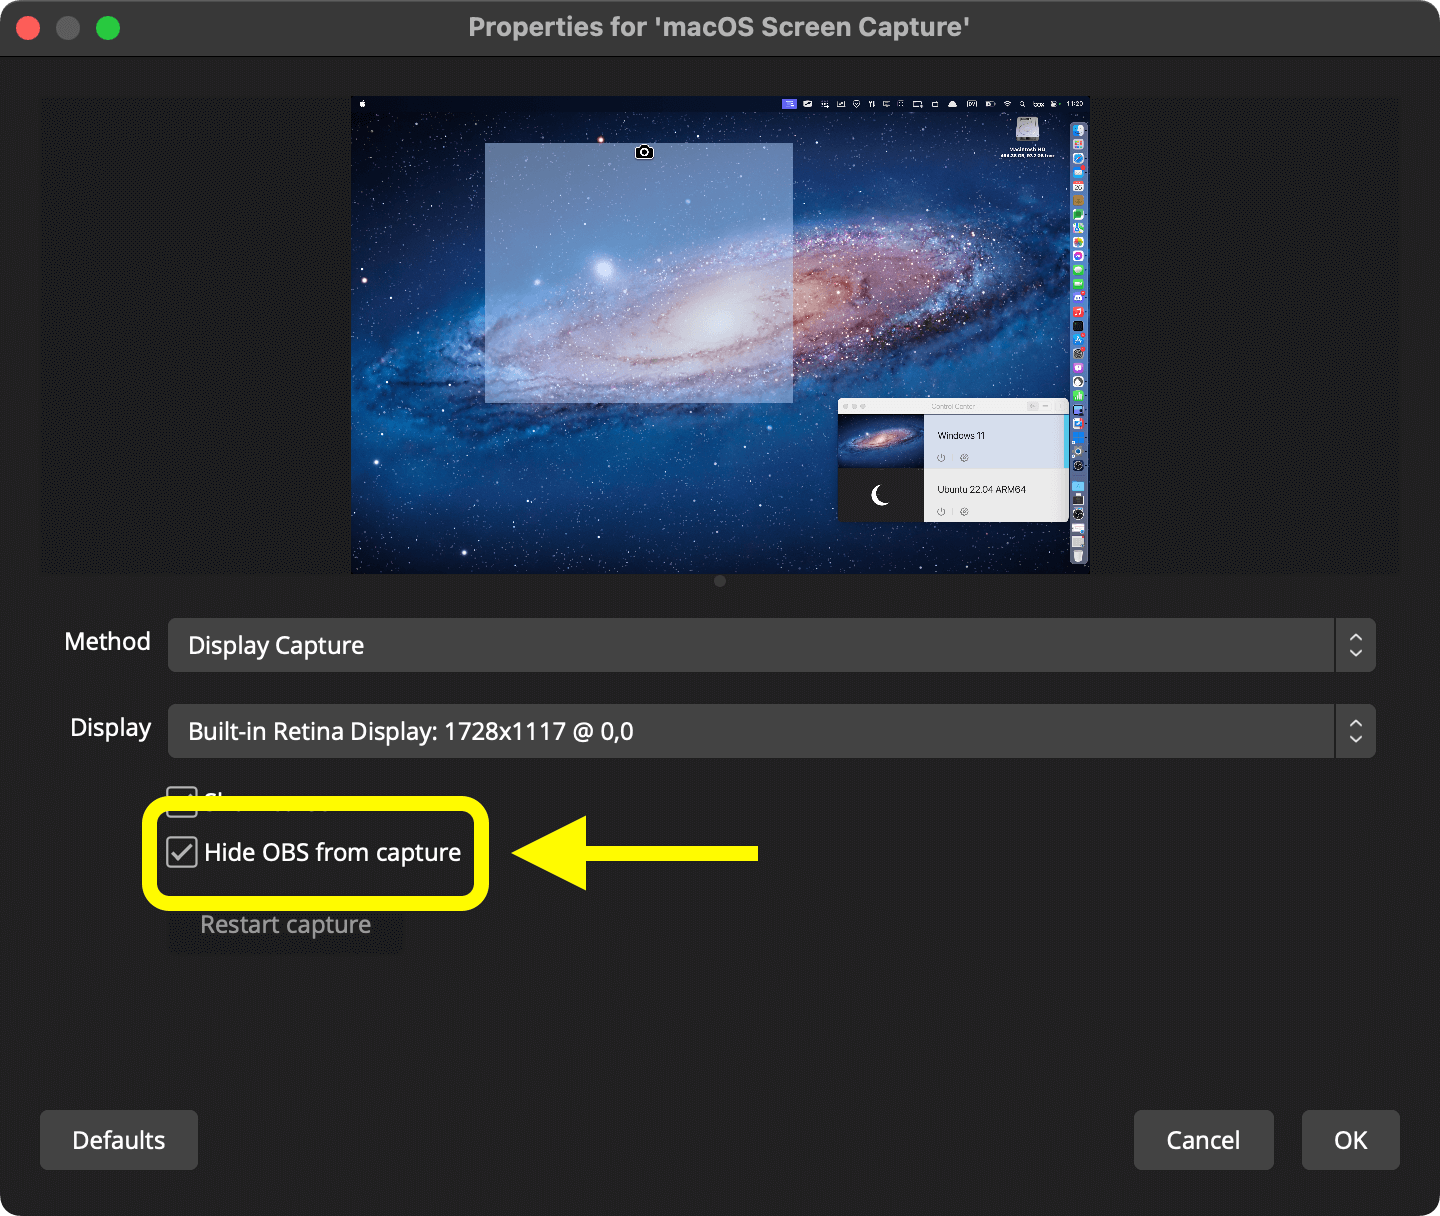 macOS Screen Capture properties window with the "Hide OBS from capture" option highlighted